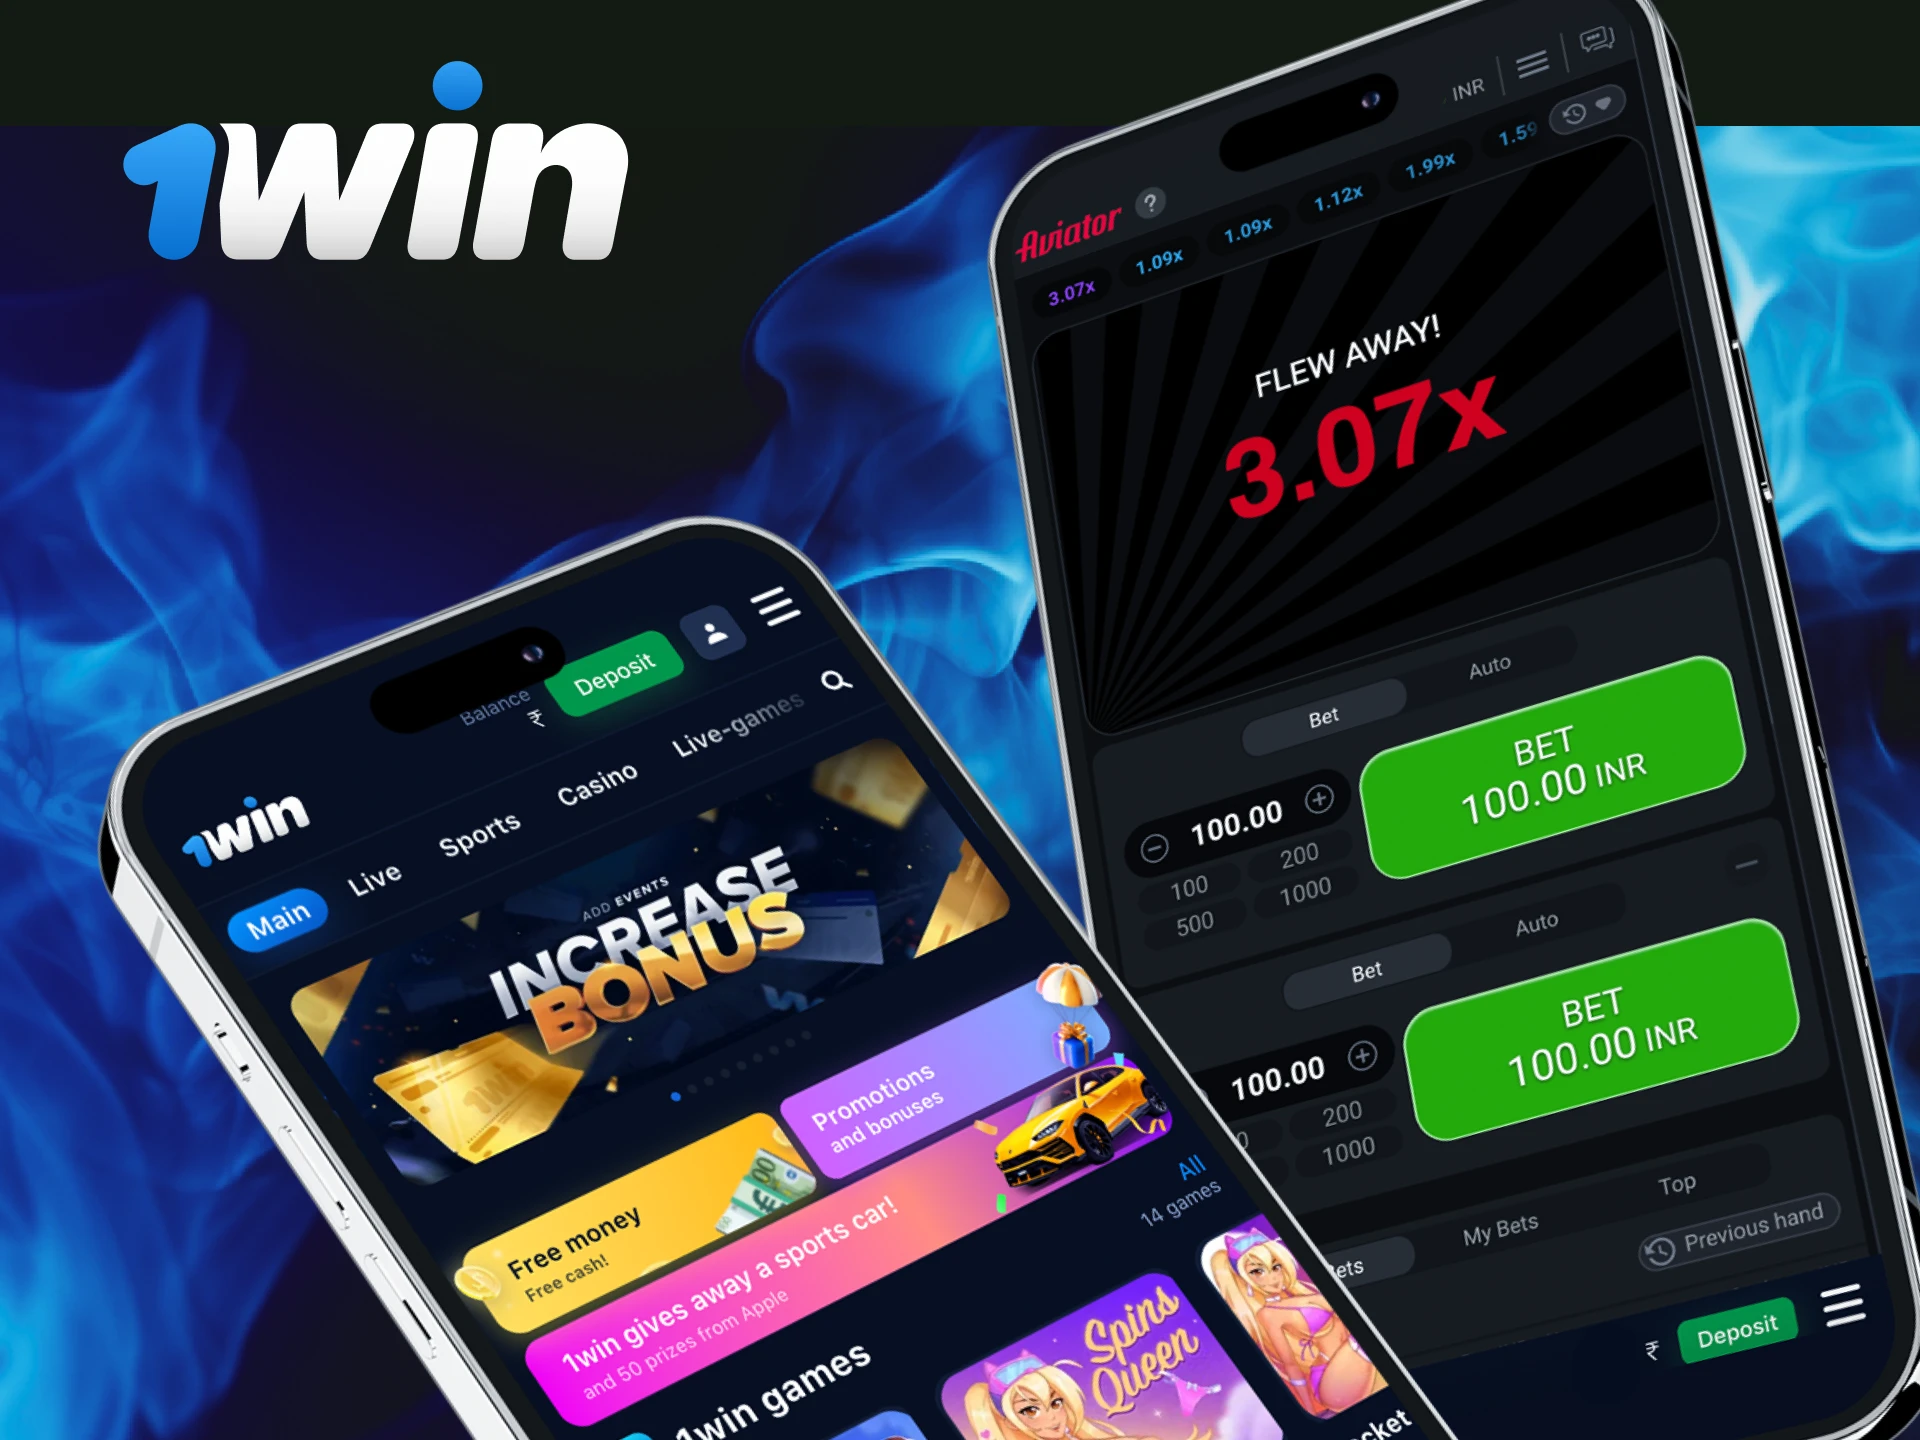 The 1win casino mobile app provides the following features: you can create an account, log in, deposit INR into your account balance, receive winnings and withdraw them.